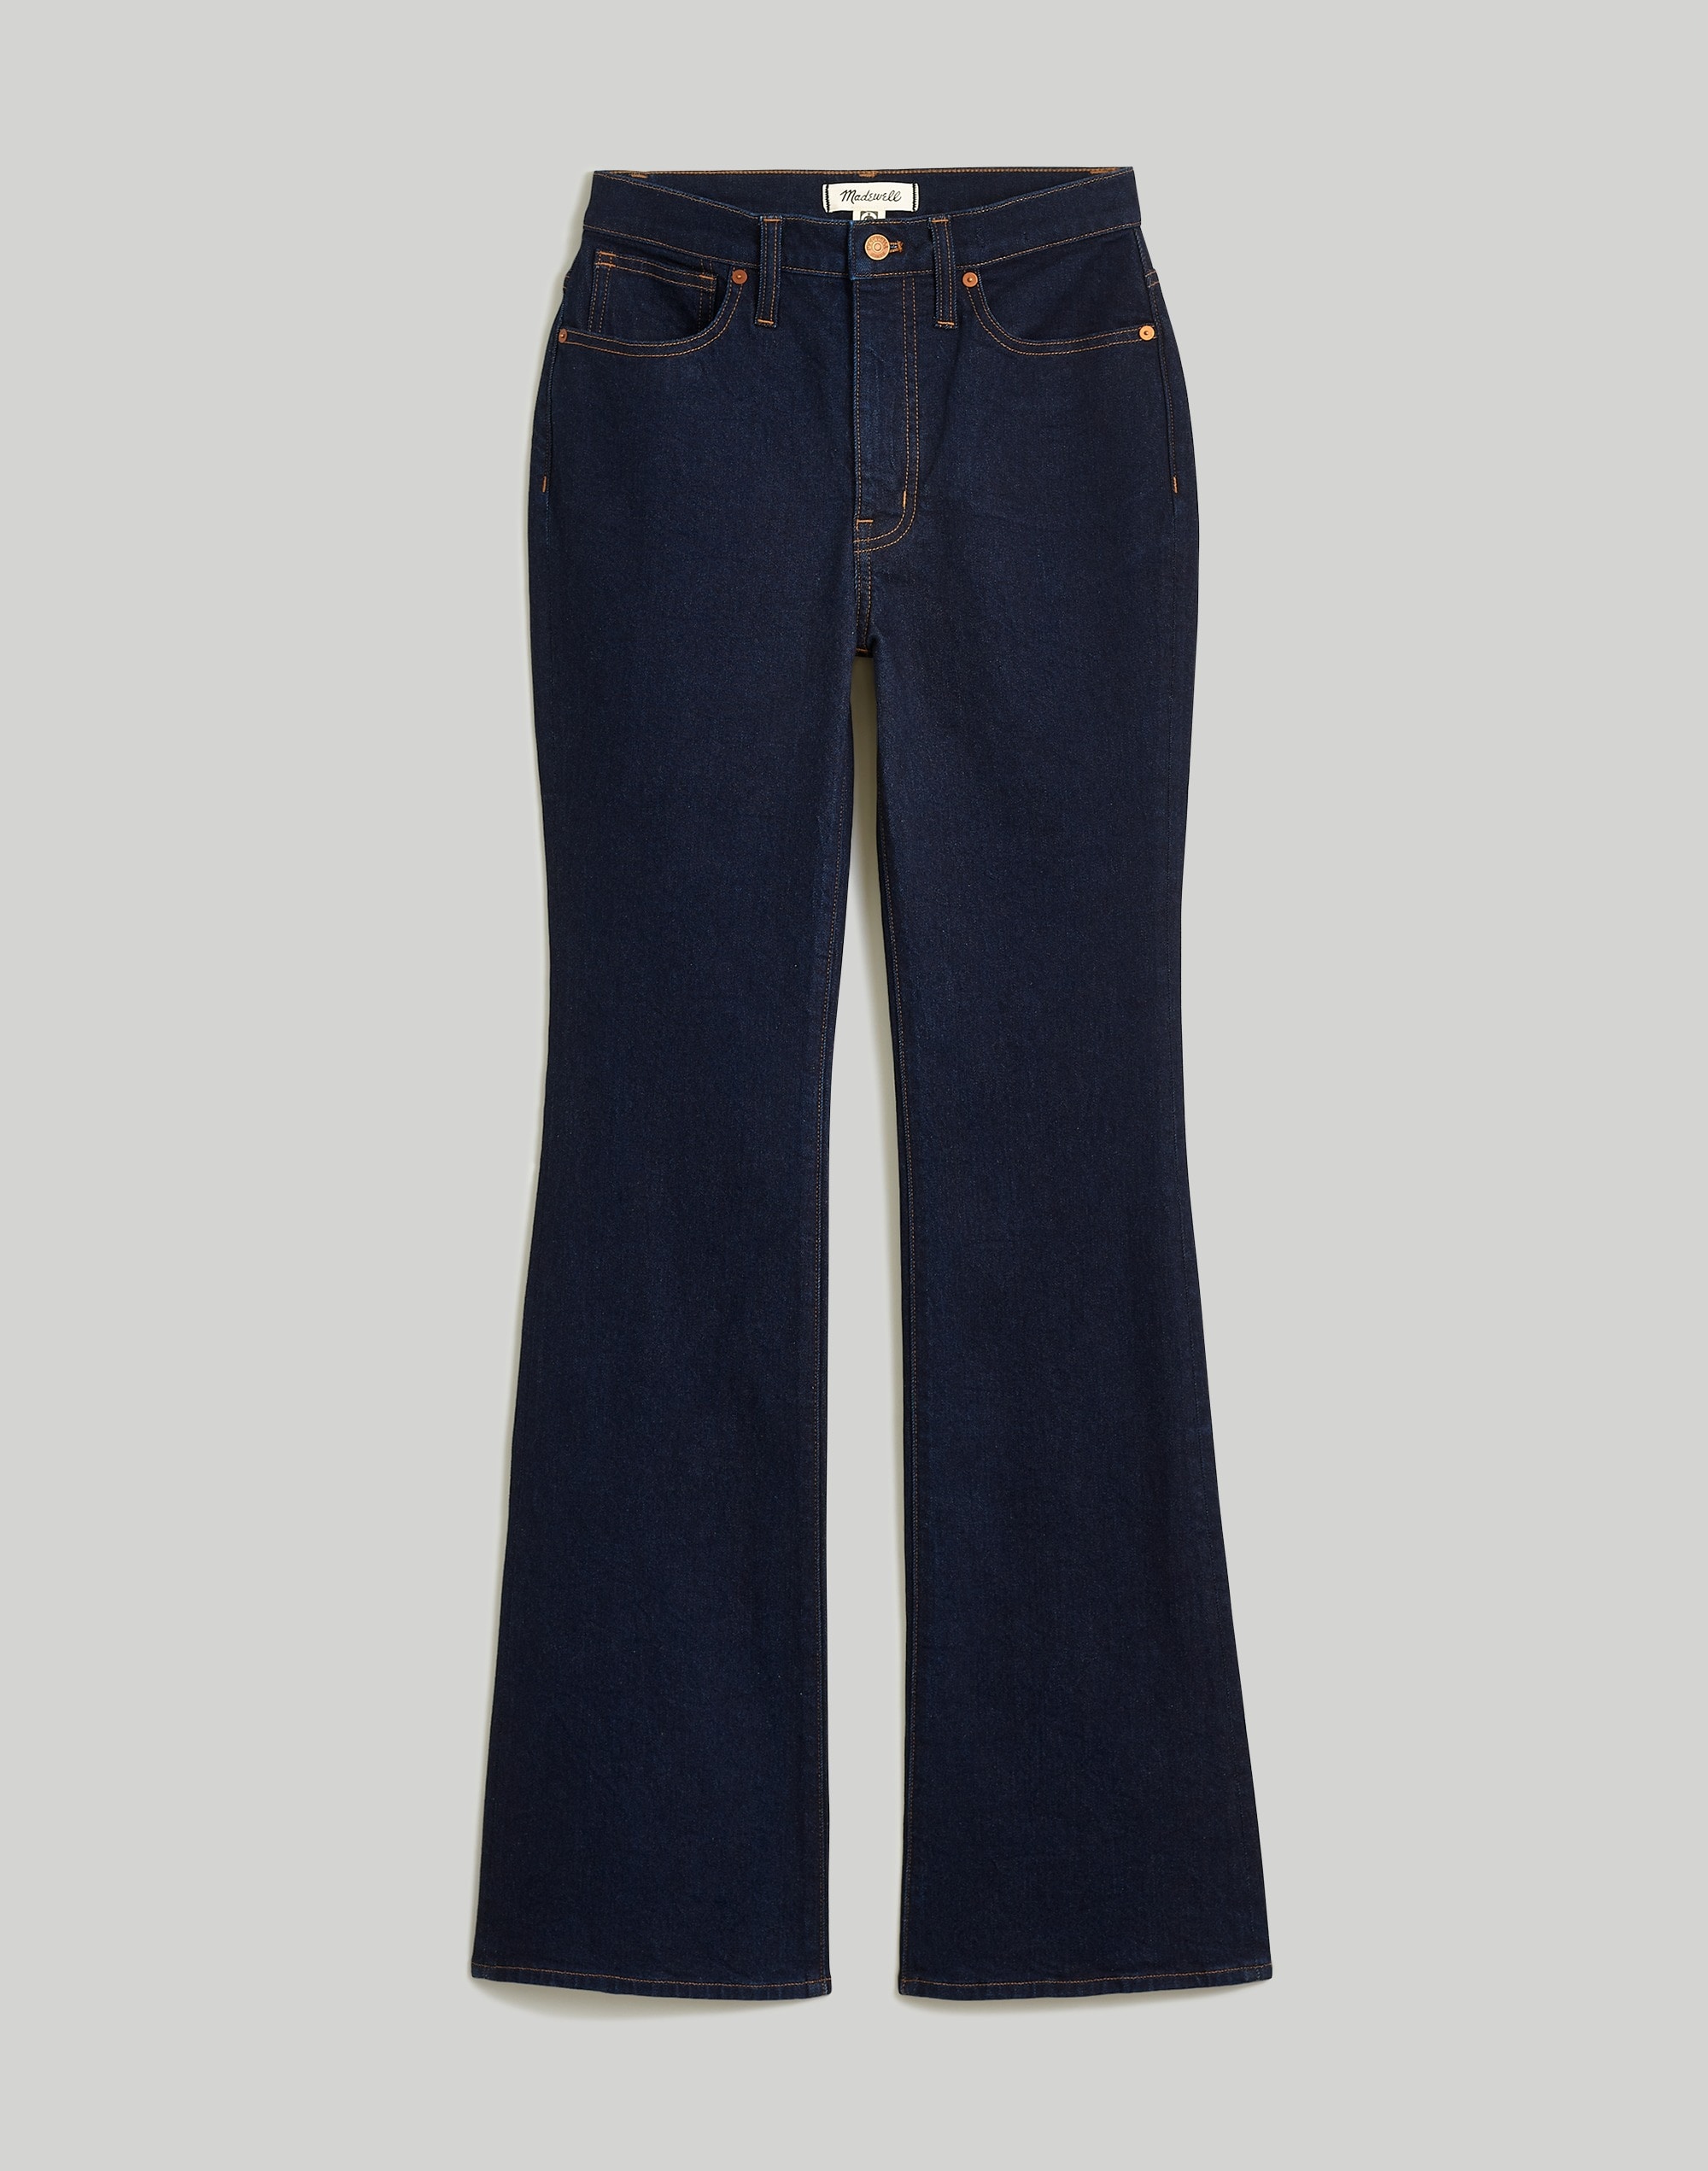 Skinny Flare Jeans Rinse Wash